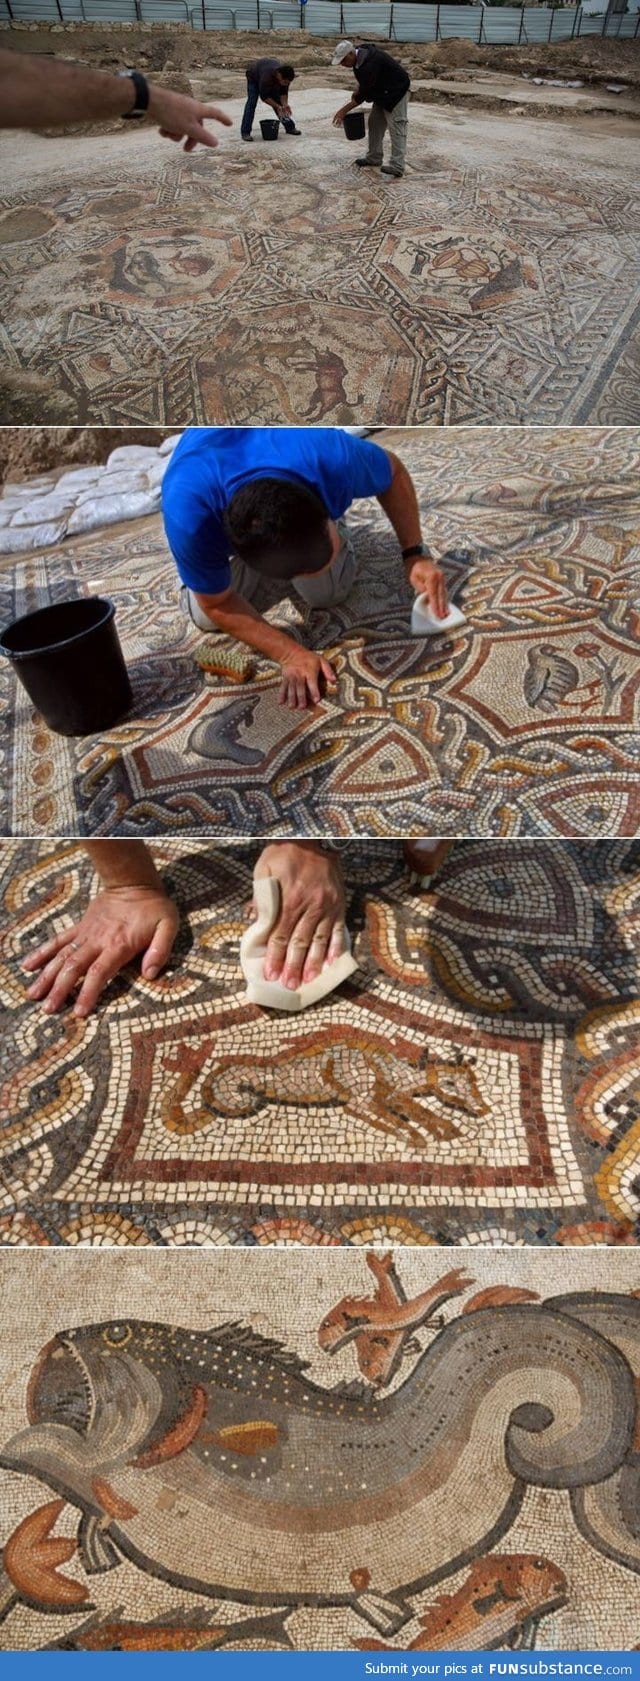 A massive, well-preserved; 1,700 year-old Roman mosaic was recently unearthed while